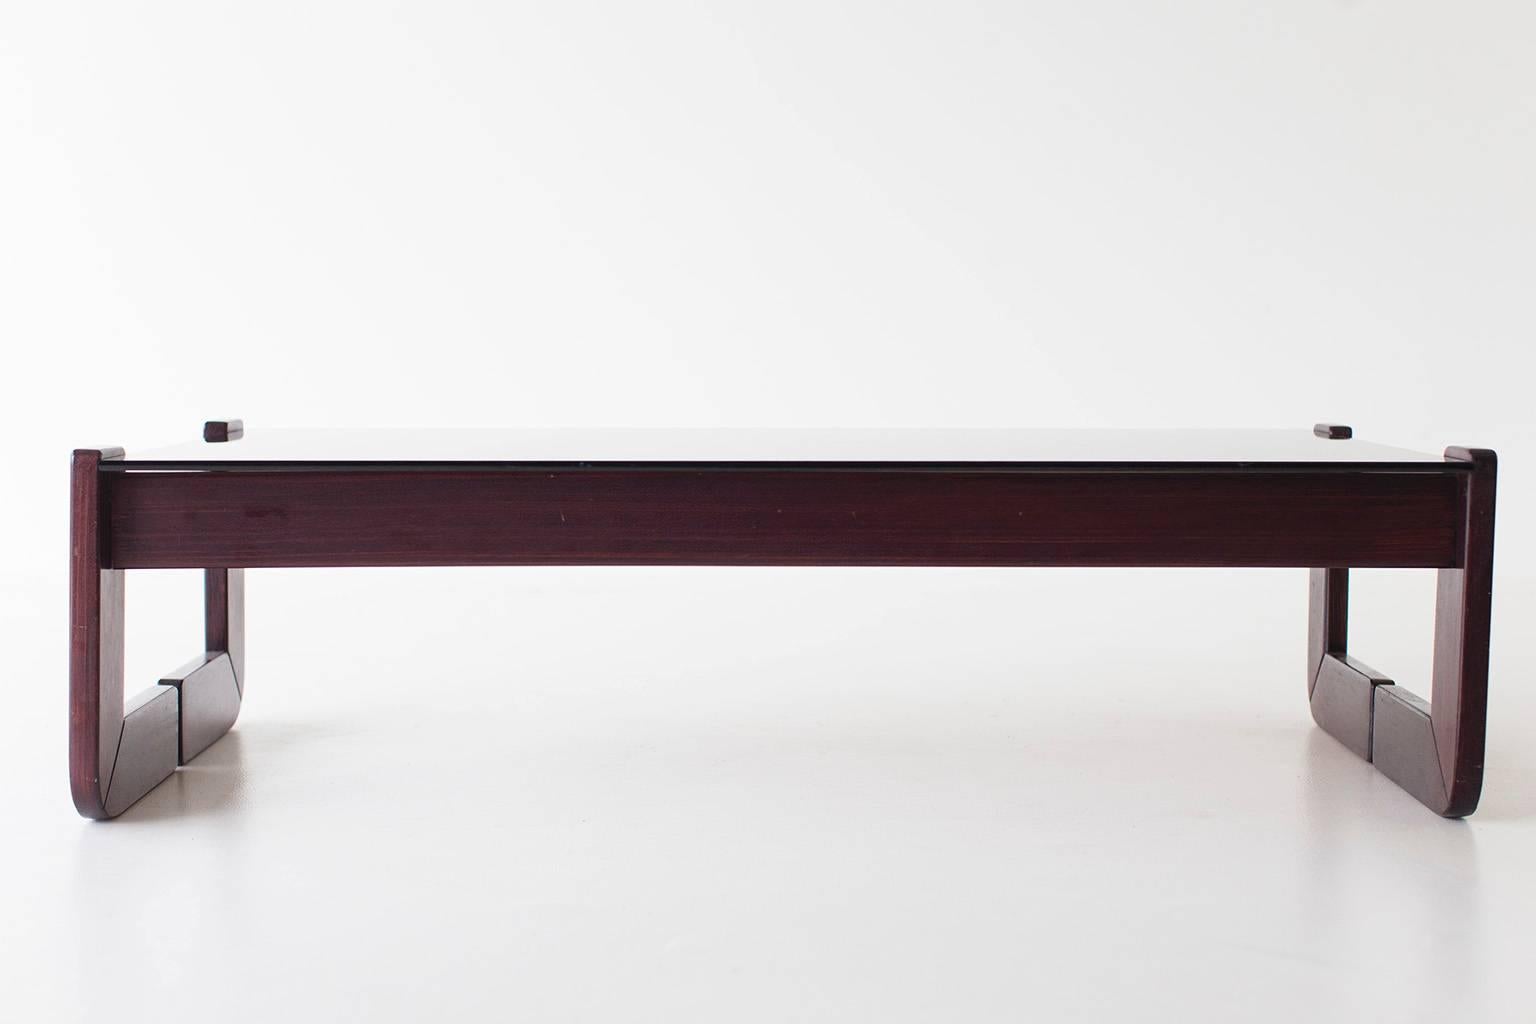 Designer: Percival Lafer. 

Manufacturer: Percival Lafer. 
Period or model: Mid-Century Modern. 
Specifications: Rosewood, glass. 

Condition: 

This Percival Lafer rosewood and glass coffee table is in very good original condition. The wood